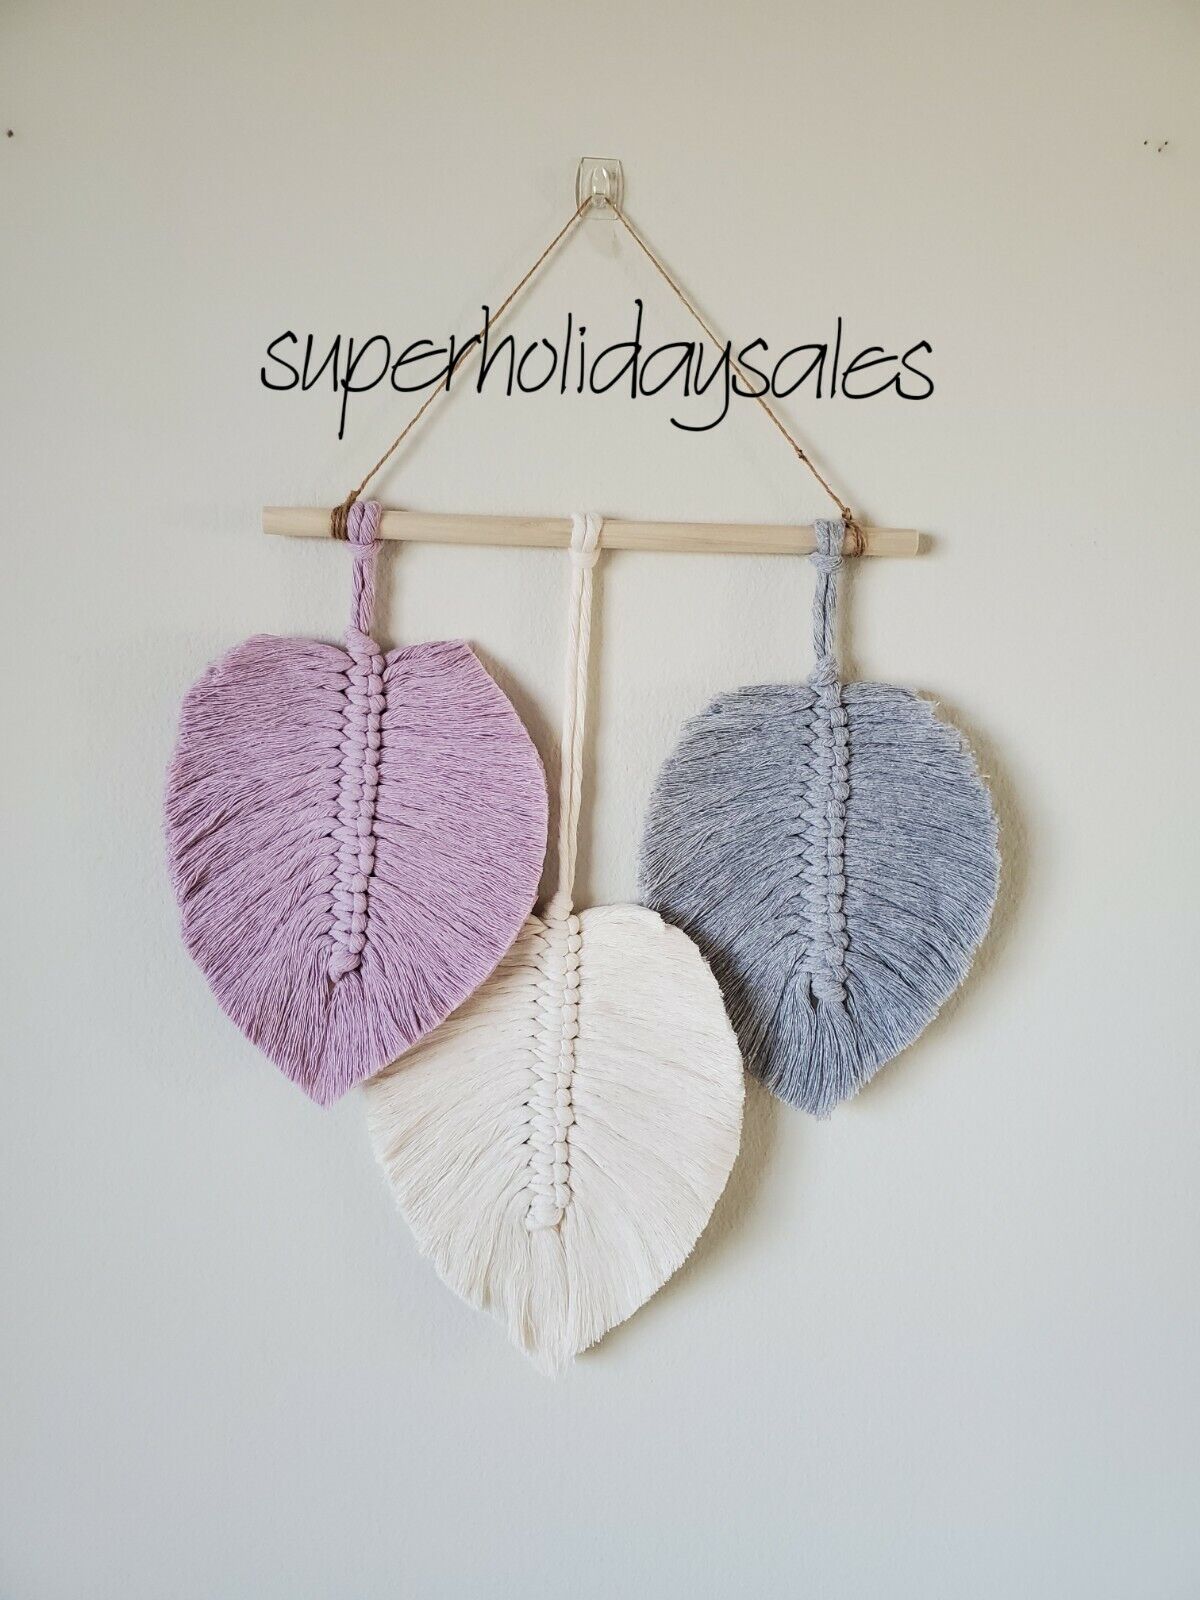 New Macrame Feathers/leaves 3 Colors Neutral Lavender Cream Gray Handmade 🍂🍃🪶